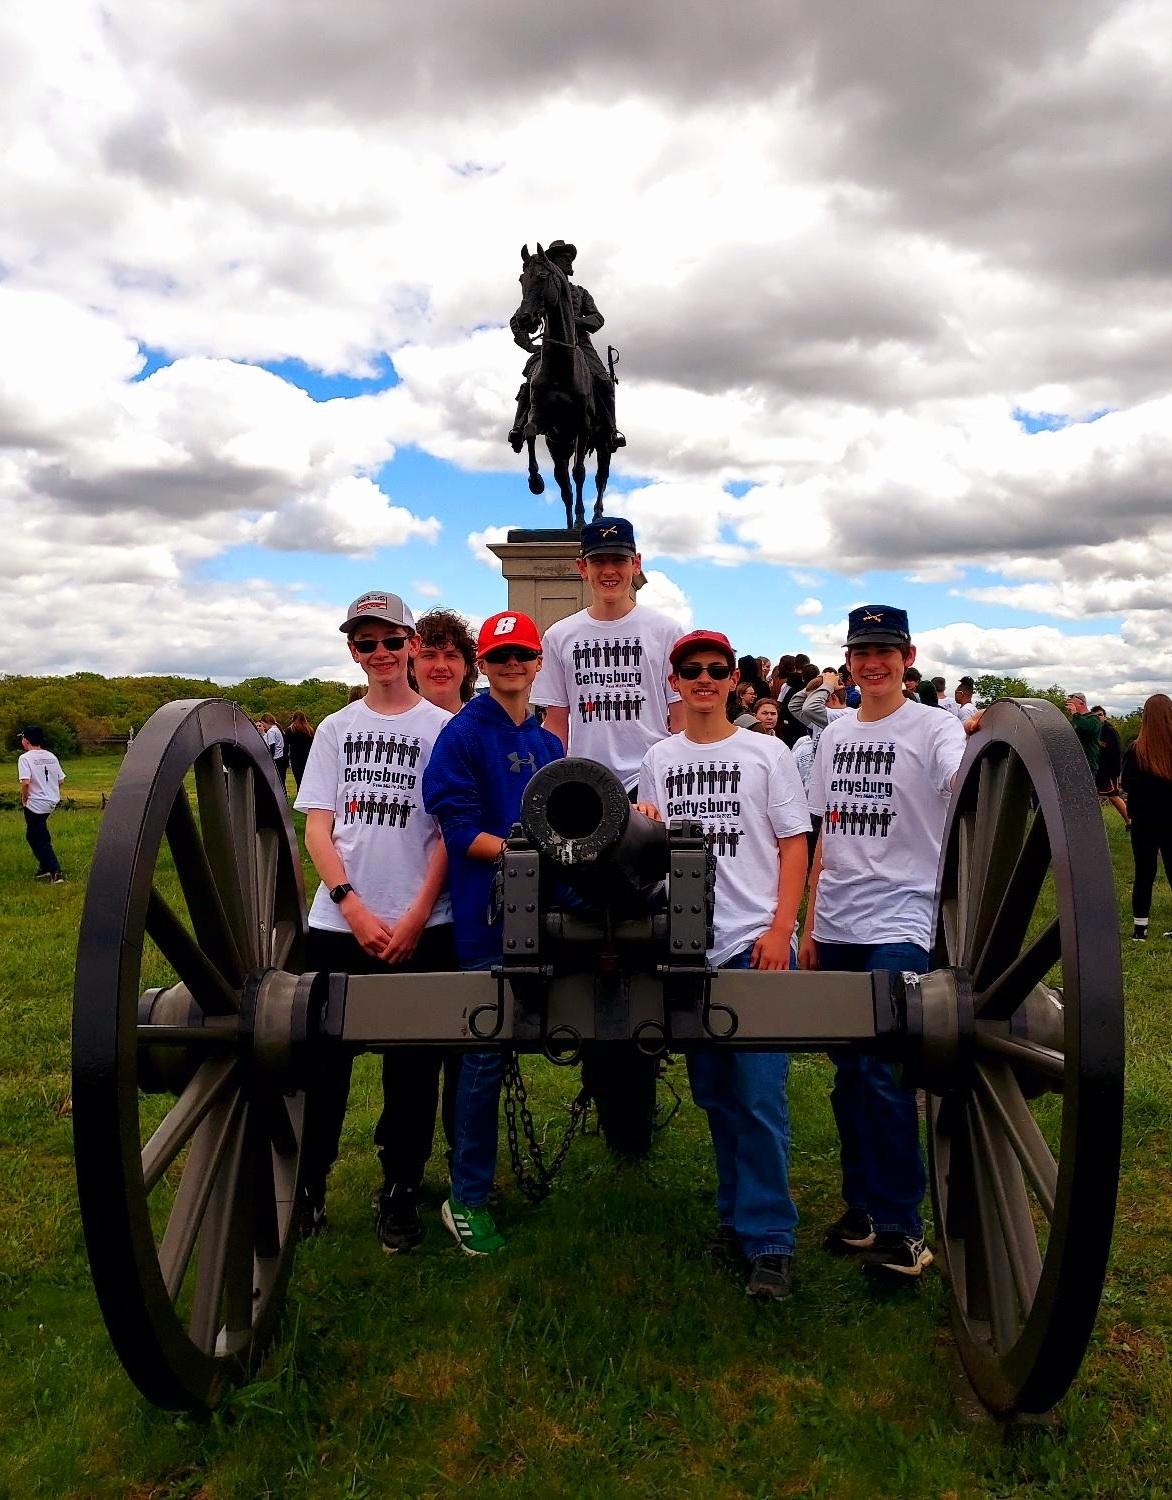 Penn Middle students Andy Baker, Josh Noble, Alex Haas, Collin Dransart, Scotty Clark, and Paul Pierce in front of the John Reynolds Monument